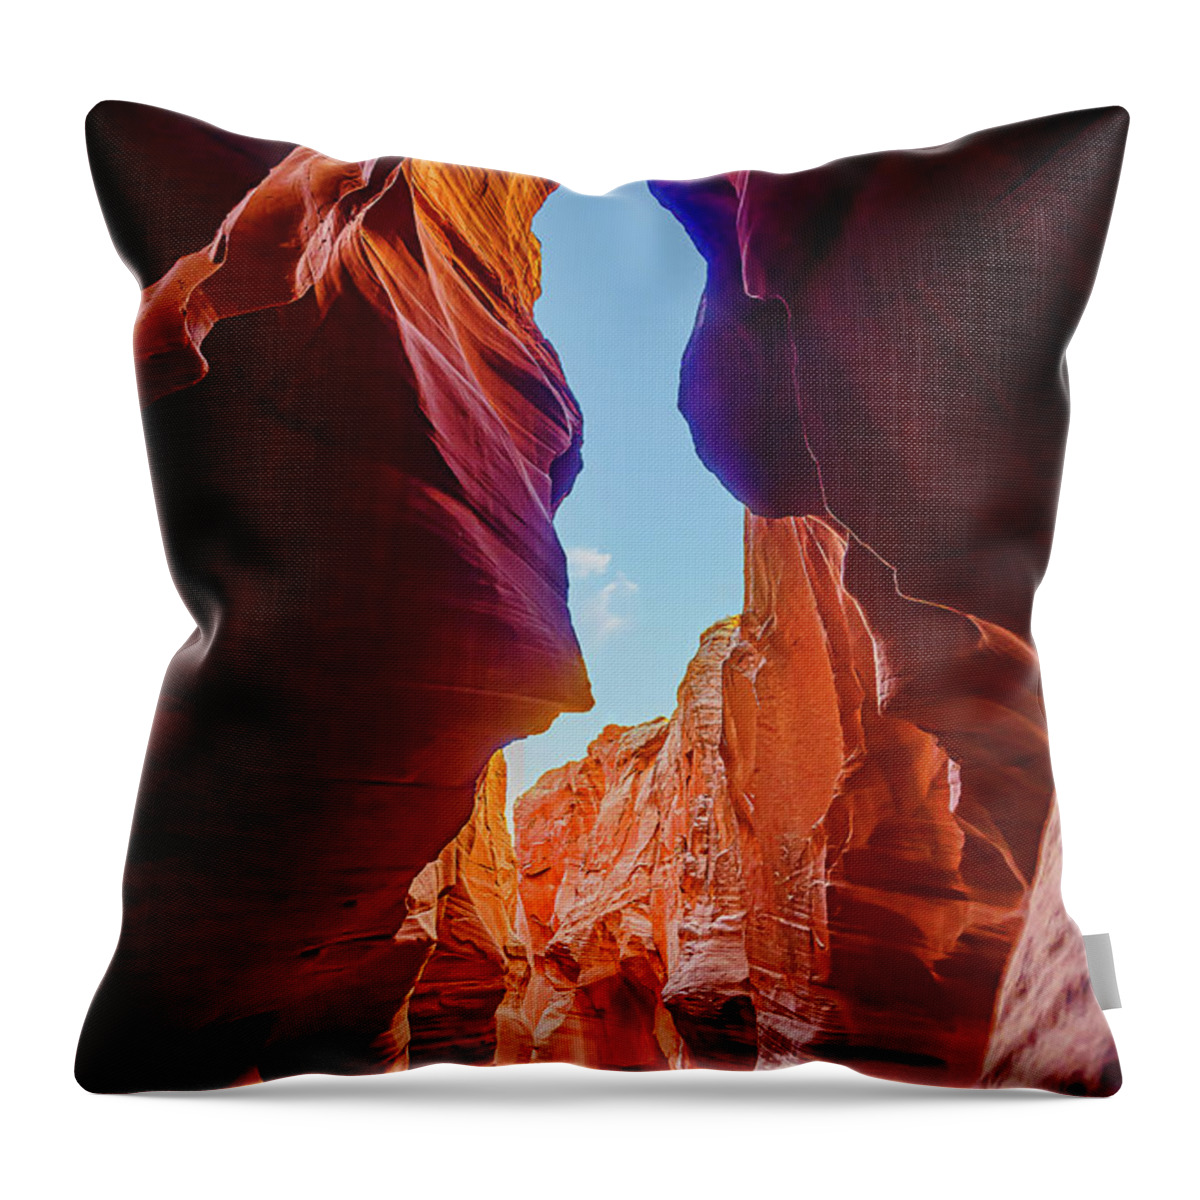 Landscape Throw Pillow featuring the photograph Antilope Series 12 by Silvia Marcoschamer